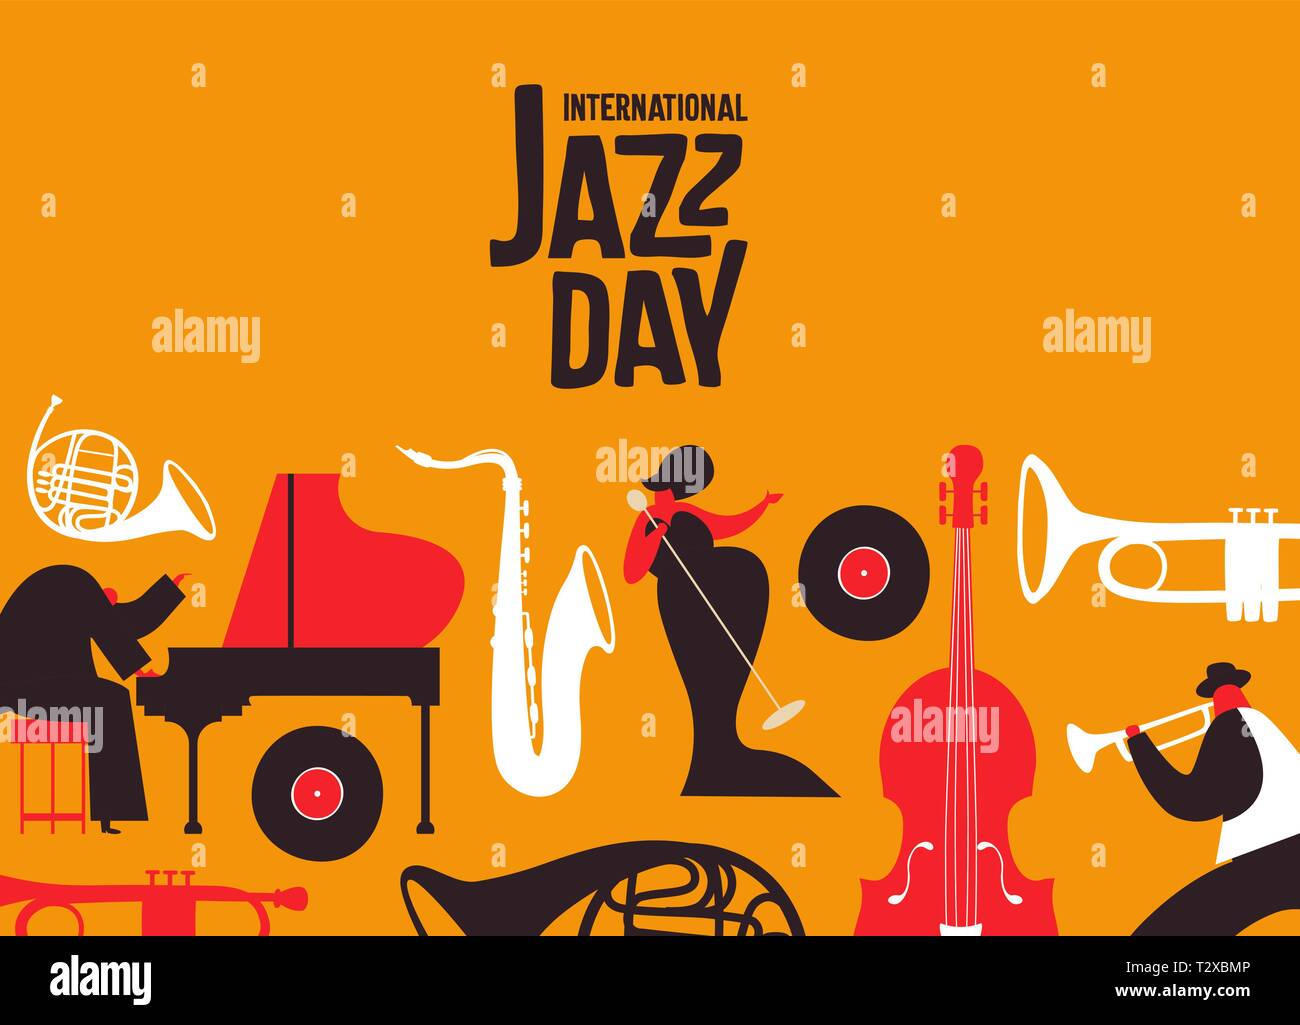 International Jazz Day poster illustration of retro style music instruments and band people for musical concert or festival event. Stock Vector